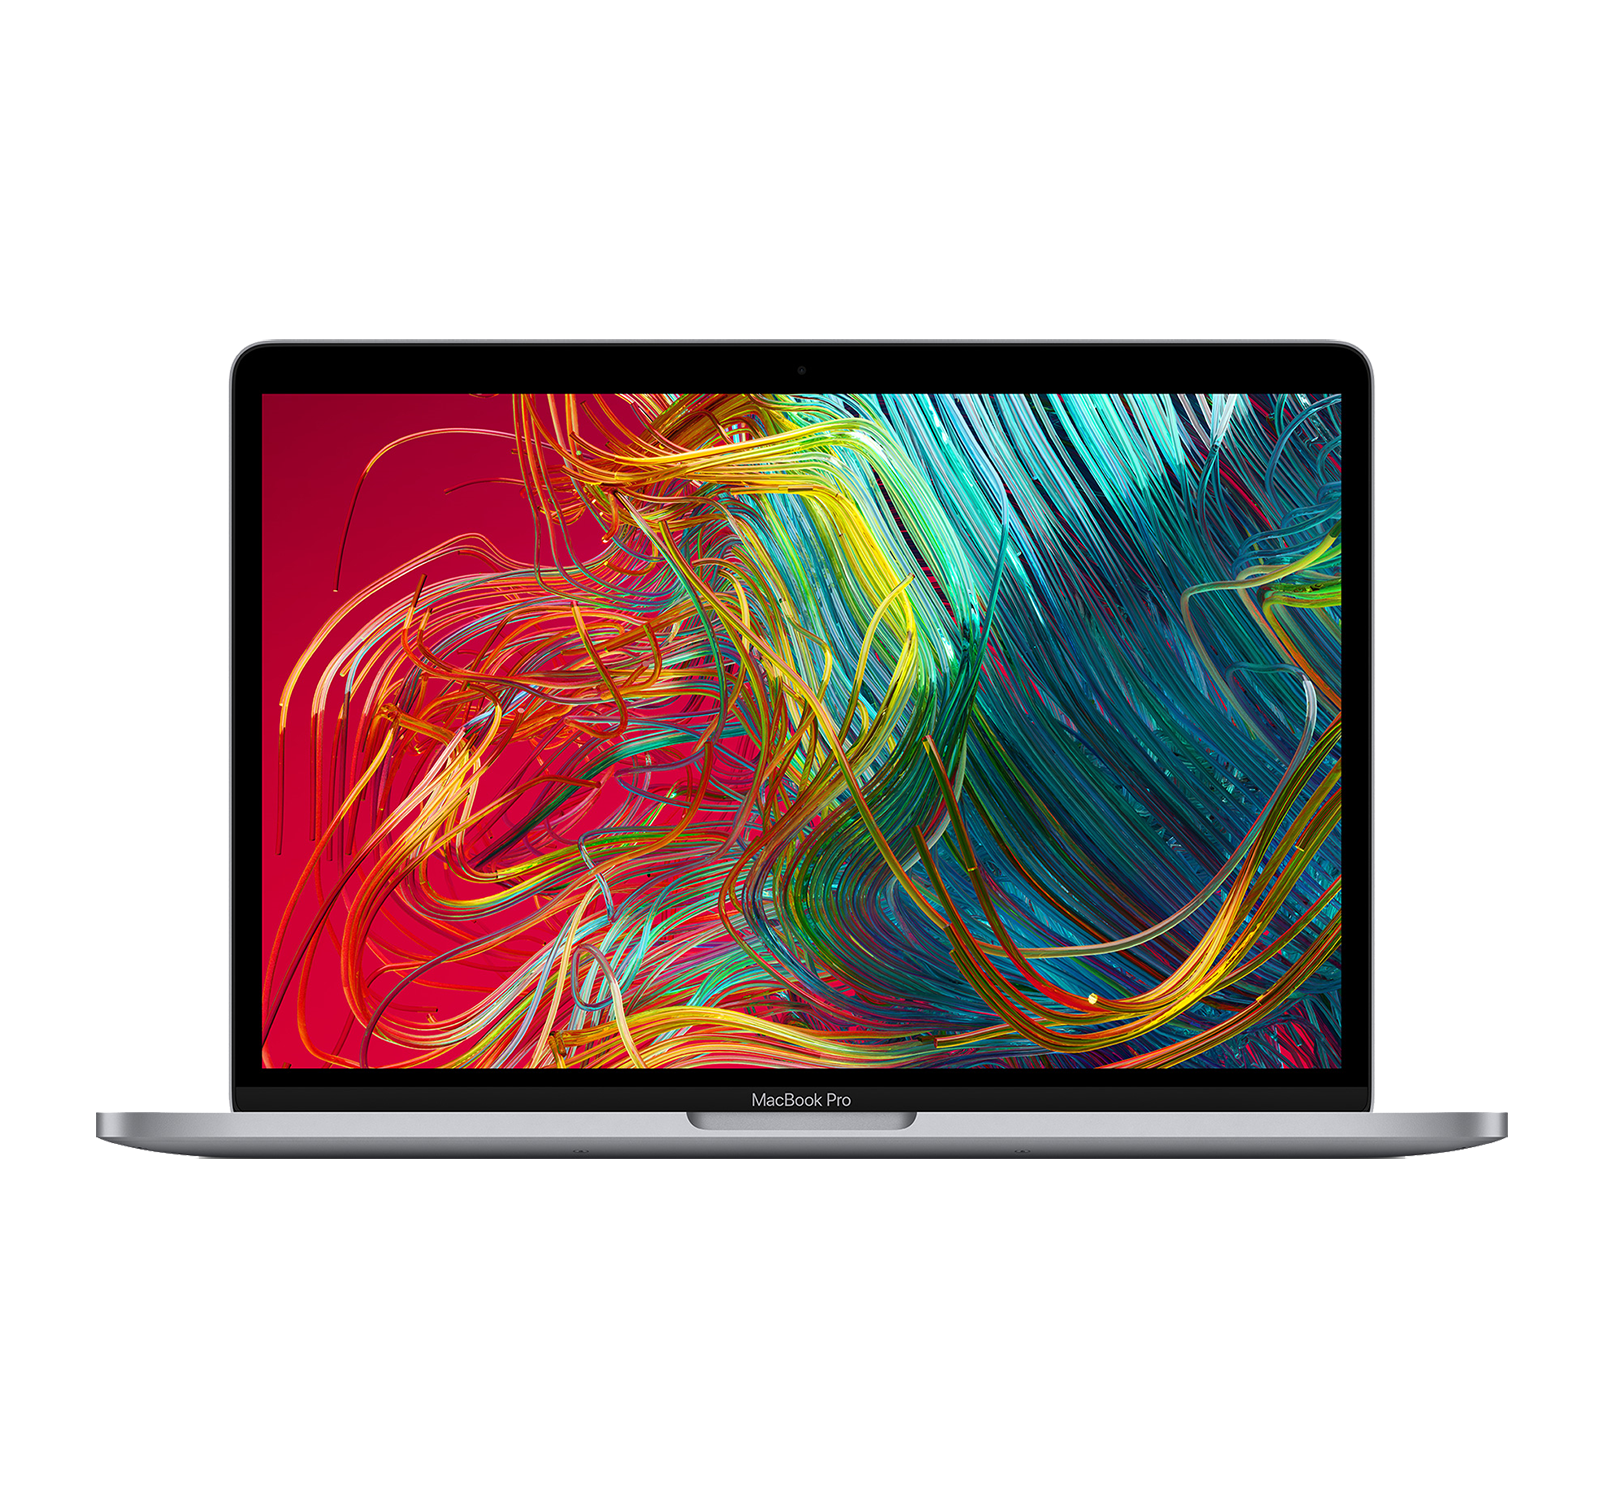 MacBook Pro 13-inch 2020 Z0Y6-MWP4-13 | Best Prices, Coupons, Deals